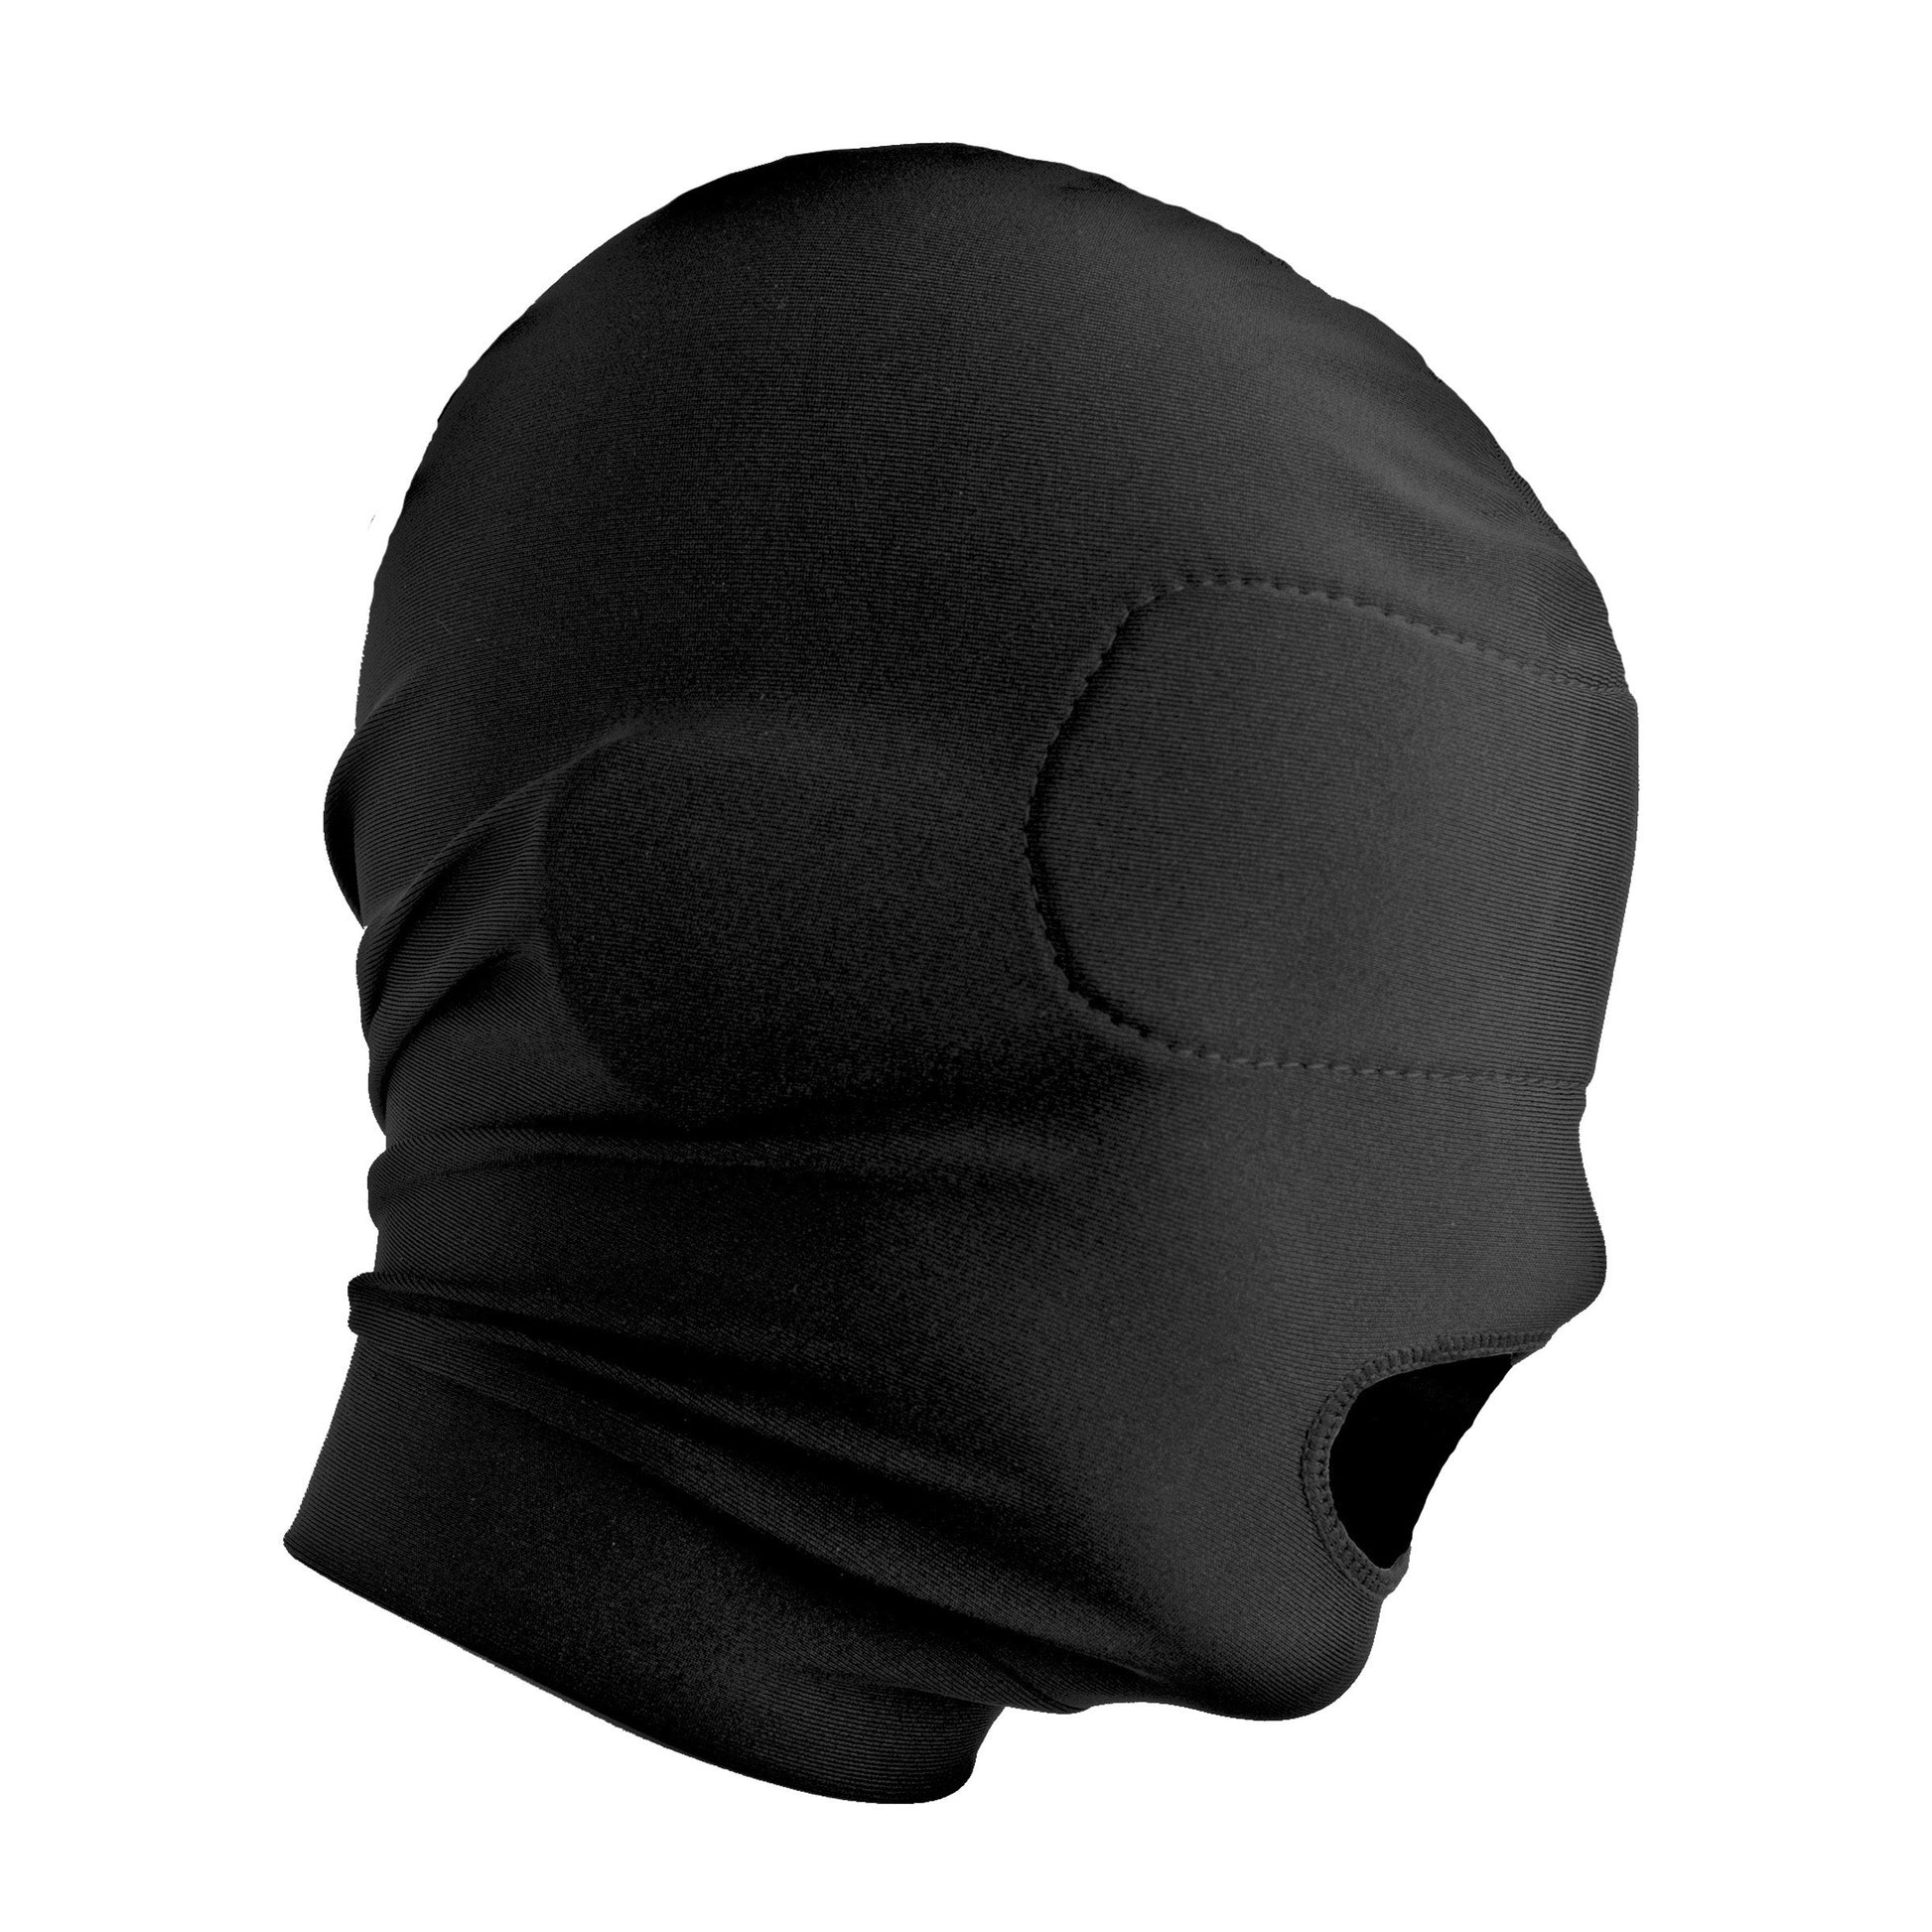 Disguise Open Mouth Hood with Padded Blindfold - UABDSM